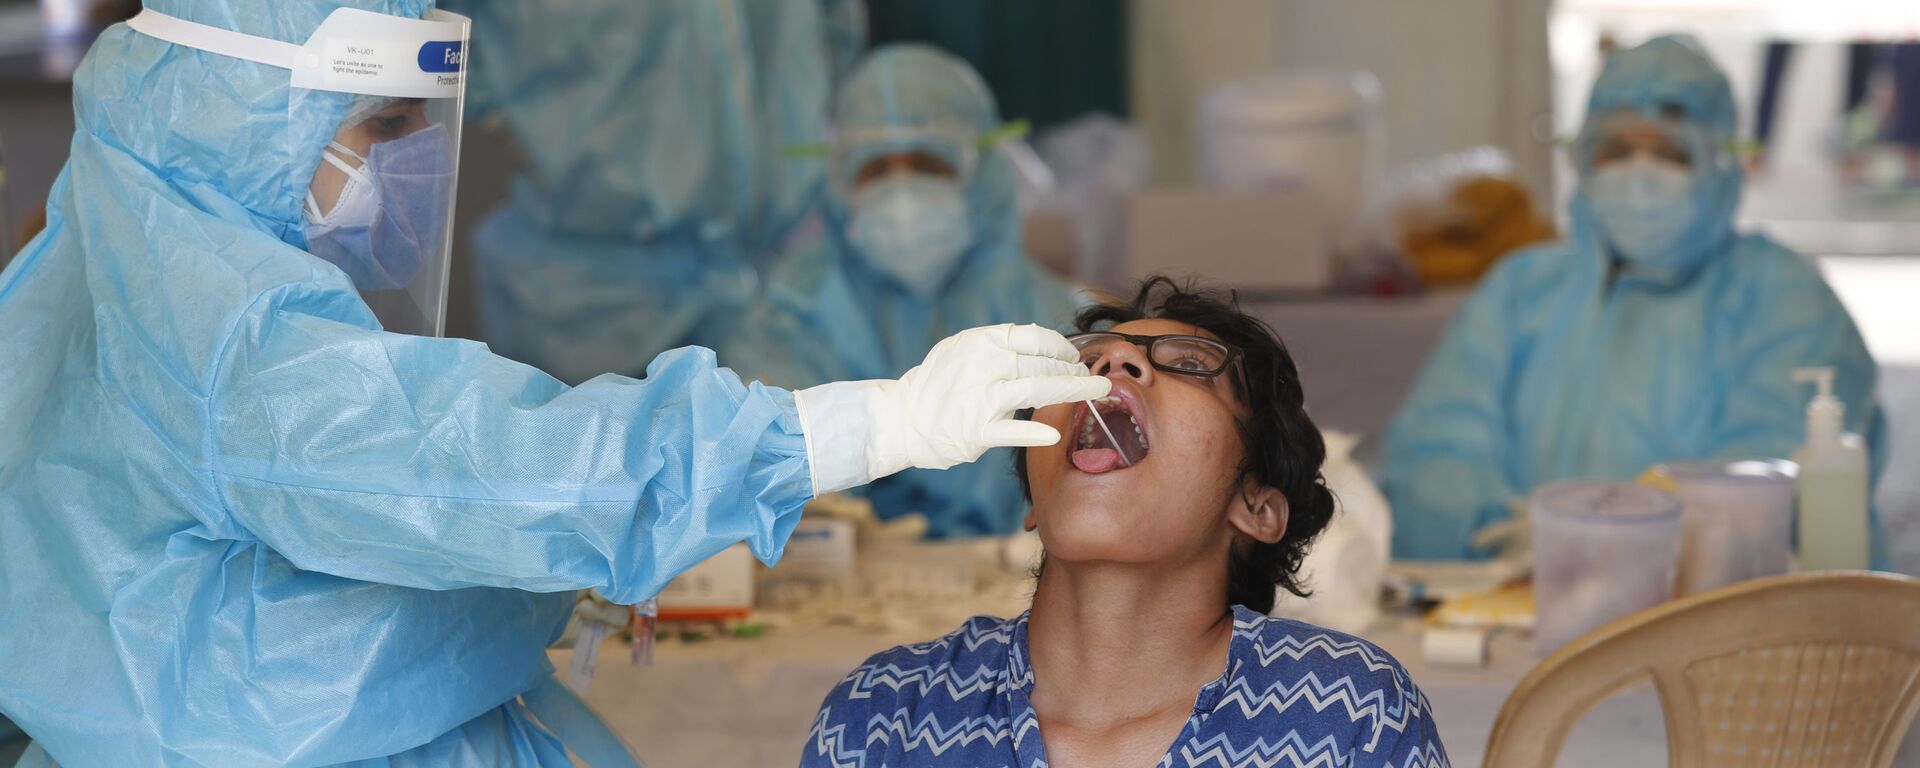 A health worker takes a swab test at a COVID-19 testing center in New Delhi, India, Monday, April 27, 2020. India’s main medical research organization has cancelled orders to procure rapid antibody test kits from two Chinese companies after quality issues and controversies over its price.  - Sputnik International, 1920, 26.11.2021